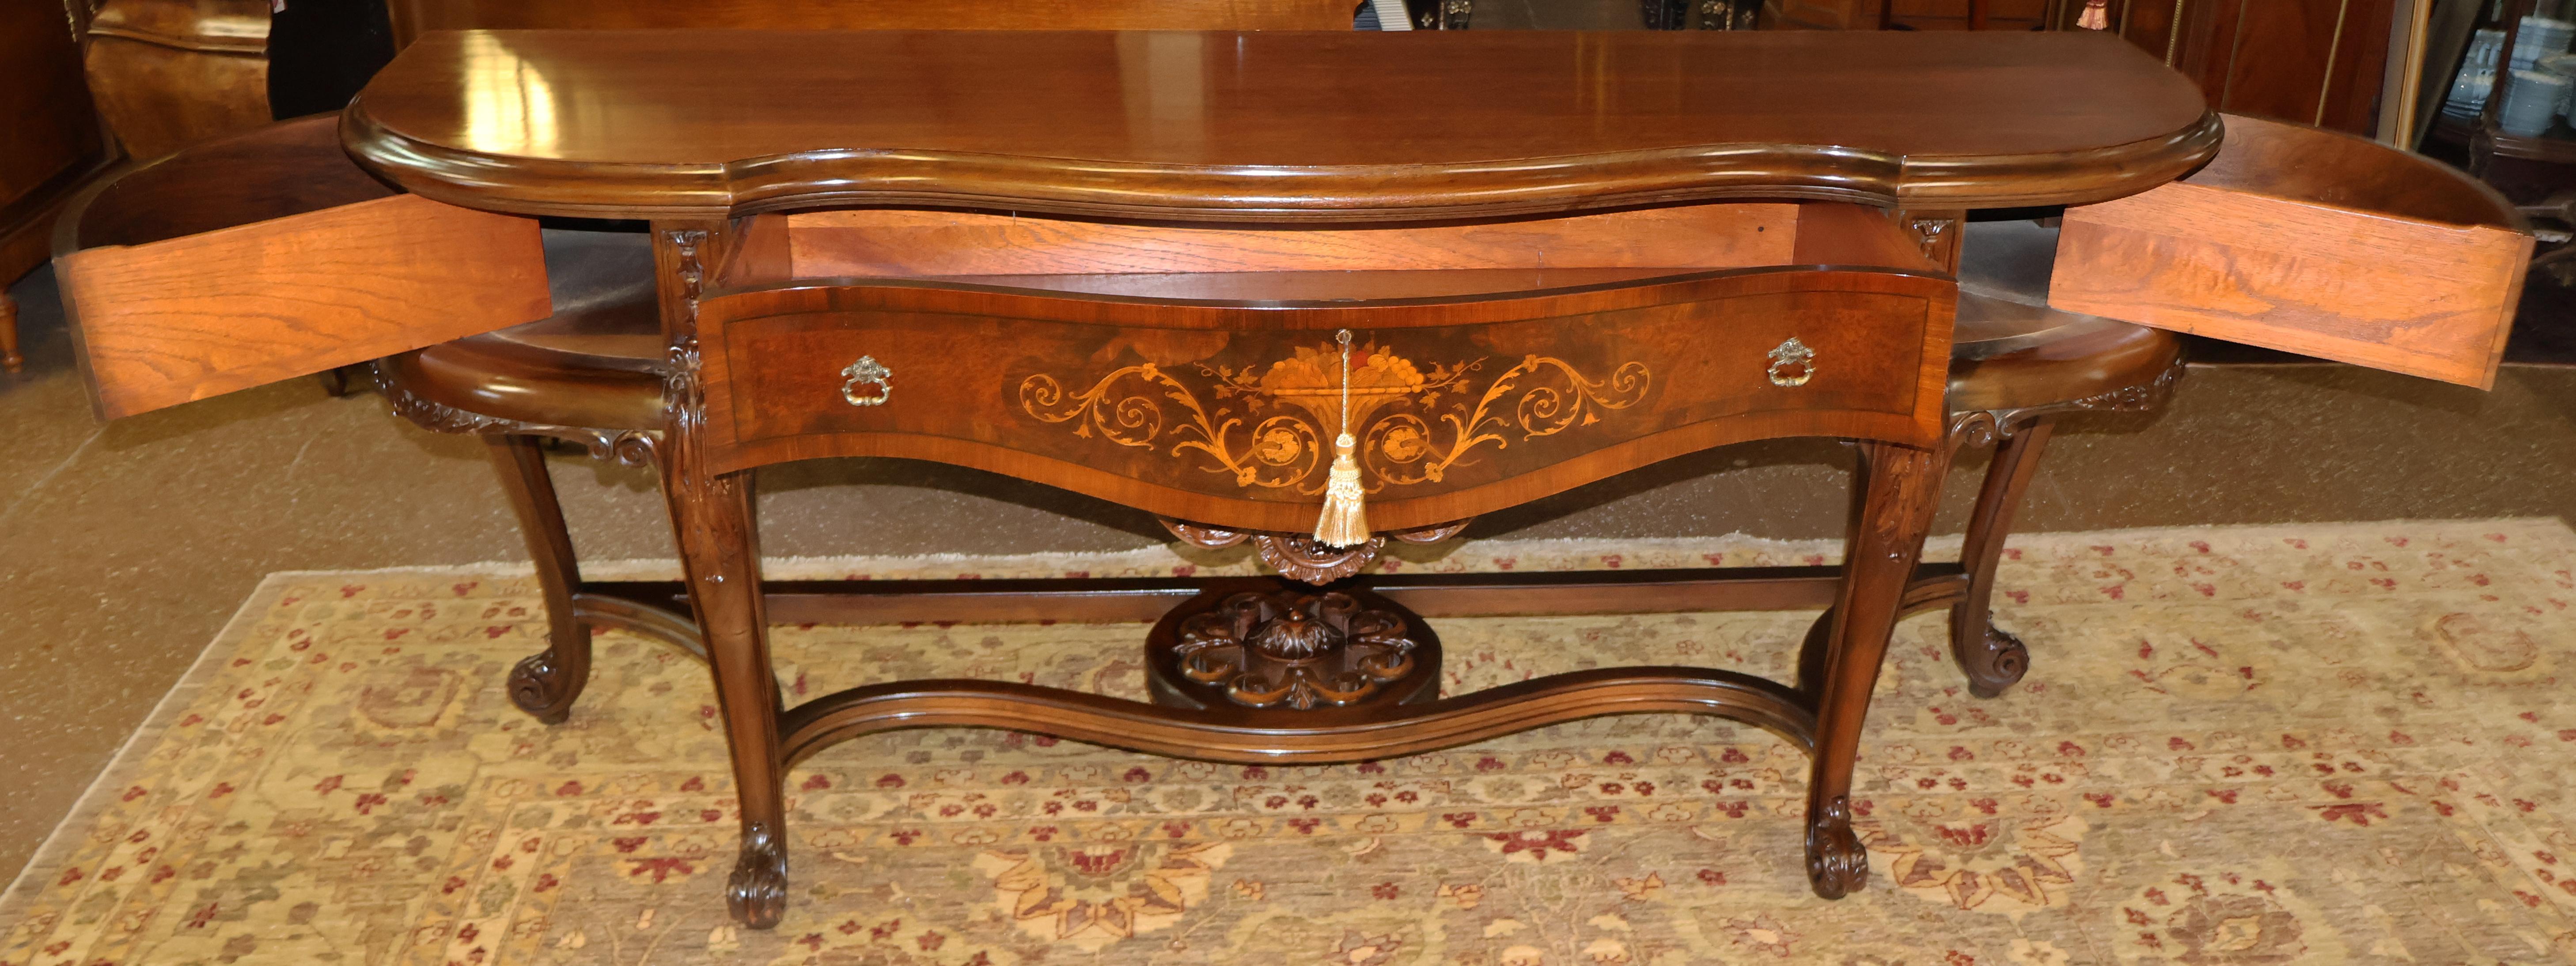 1920's Walnut Inlaid French Style Server Buffet Sideboard By Rockford Furniture For Sale 2